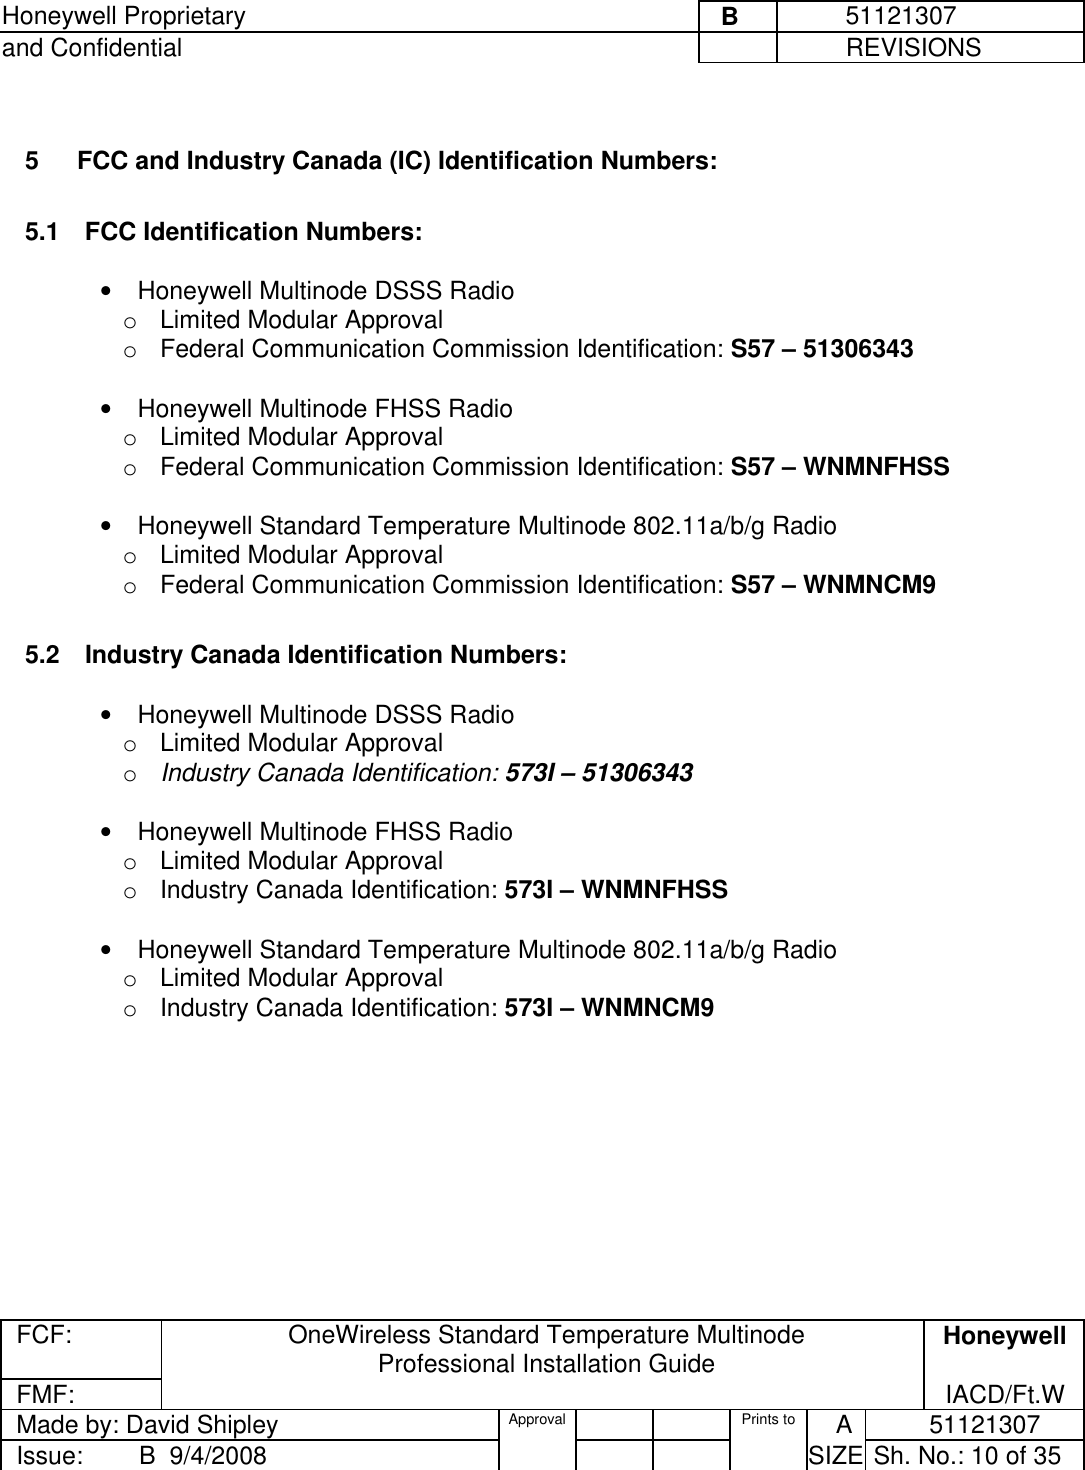 Honeywell Proprietary     B          51121307 and Confidential             REVISIONS  FCF: OneWireless Standard Temperature Multinode  Professional Installation Guide  Honeywell FMF:               IACD/Ft.W Made by: David Shipley  Approval   Prints to     A           51121307 Issue:        B  9/4/2008          SIZE  Sh. No.: 10 of 35   5   FCC and Industry Canada (IC) Identification Numbers:   5.1  FCC Identification Numbers:   •  Honeywell Multinode DSSS Radio  o  Limited Modular Approval    o  Federal Communication Commission Identification: S57 – 51306343    •  Honeywell Multinode FHSS Radio  o  Limited Modular Approval    o  Federal Communication Commission Identification: S57 – WNMNFHSS   •  Honeywell Standard Temperature Multinode 802.11a/b/g Radio  o  Limited Modular Approval    o  Federal Communication Commission Identification: S57 – WNMNCM9   5.2  Industry Canada Identification Numbers:   •  Honeywell Multinode DSSS Radio  o  Limited Modular Approval    o  Industry Canada Identification: 573I – 51306343   •  Honeywell Multinode FHSS Radio  o  Limited Modular Approval    o  Industry Canada Identification: 573I – WNMNFHSS   •  Honeywell Standard Temperature Multinode 802.11a/b/g Radio  o  Limited Modular Approval    o  Industry Canada Identification: 573I – WNMNCM9    